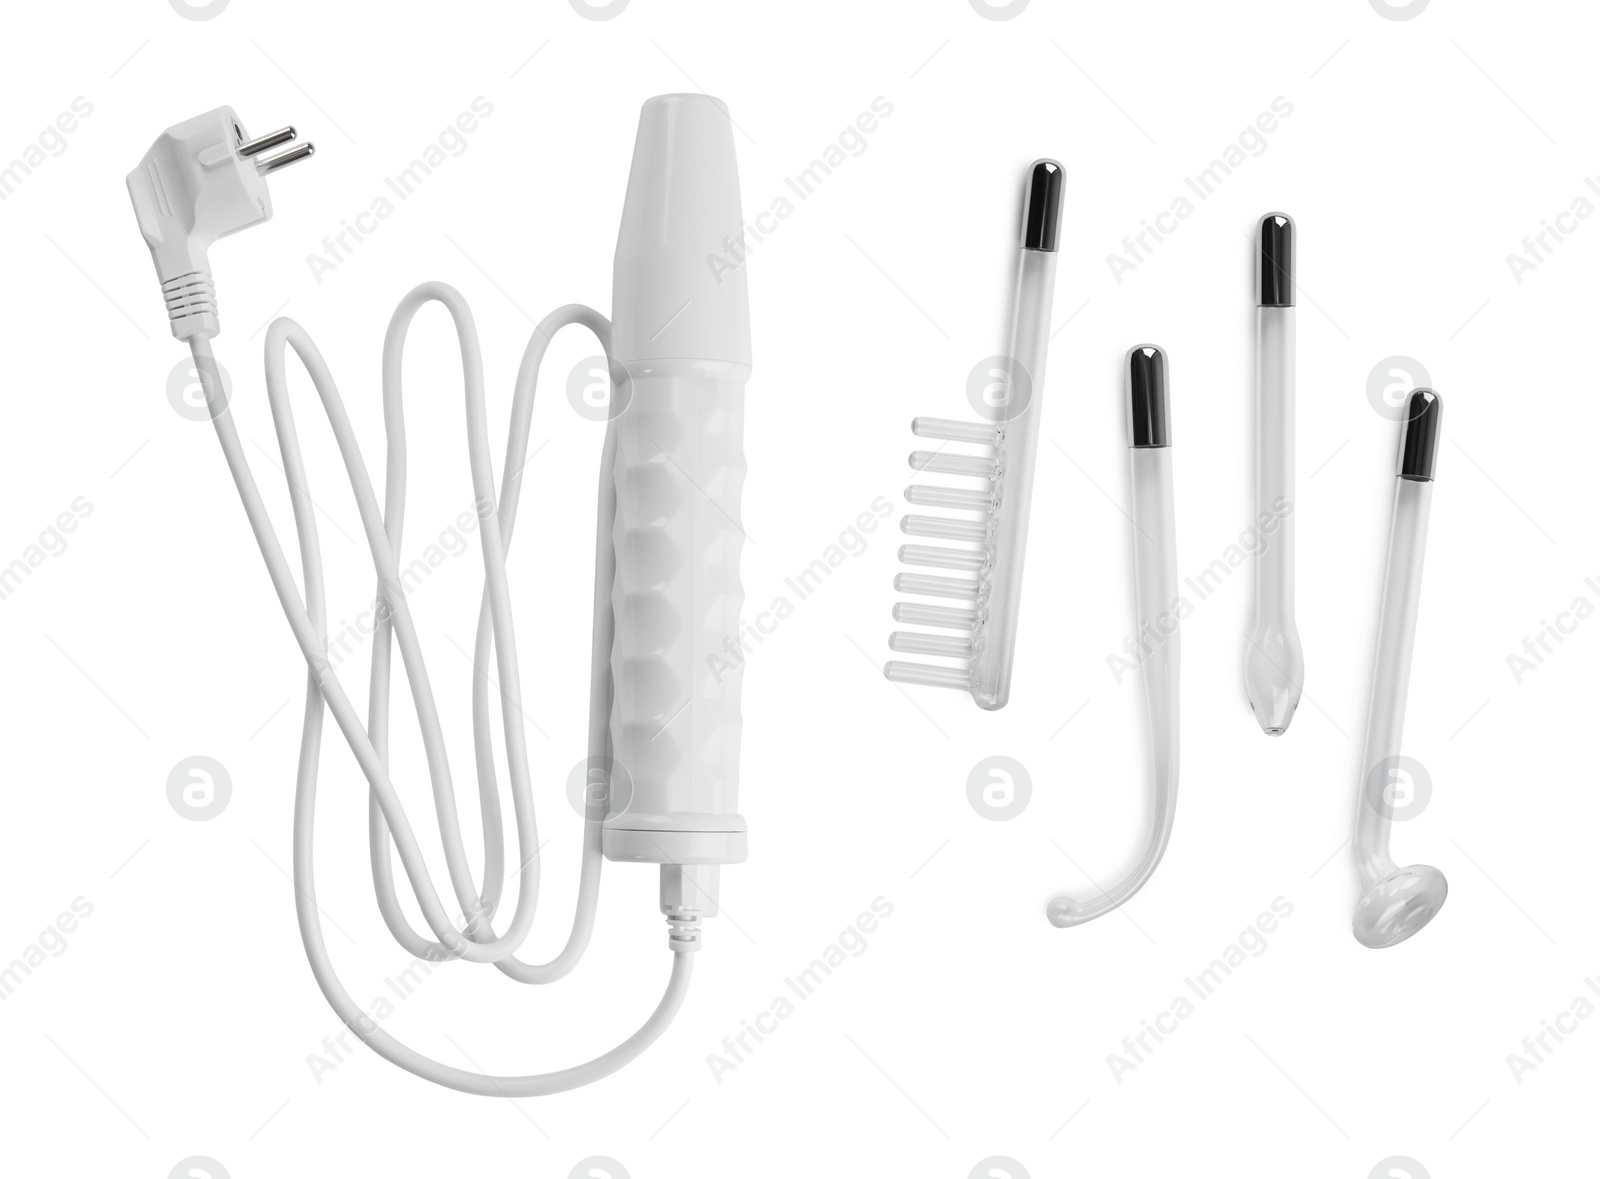 Image of Darsonval and different nozzles on white background, collage